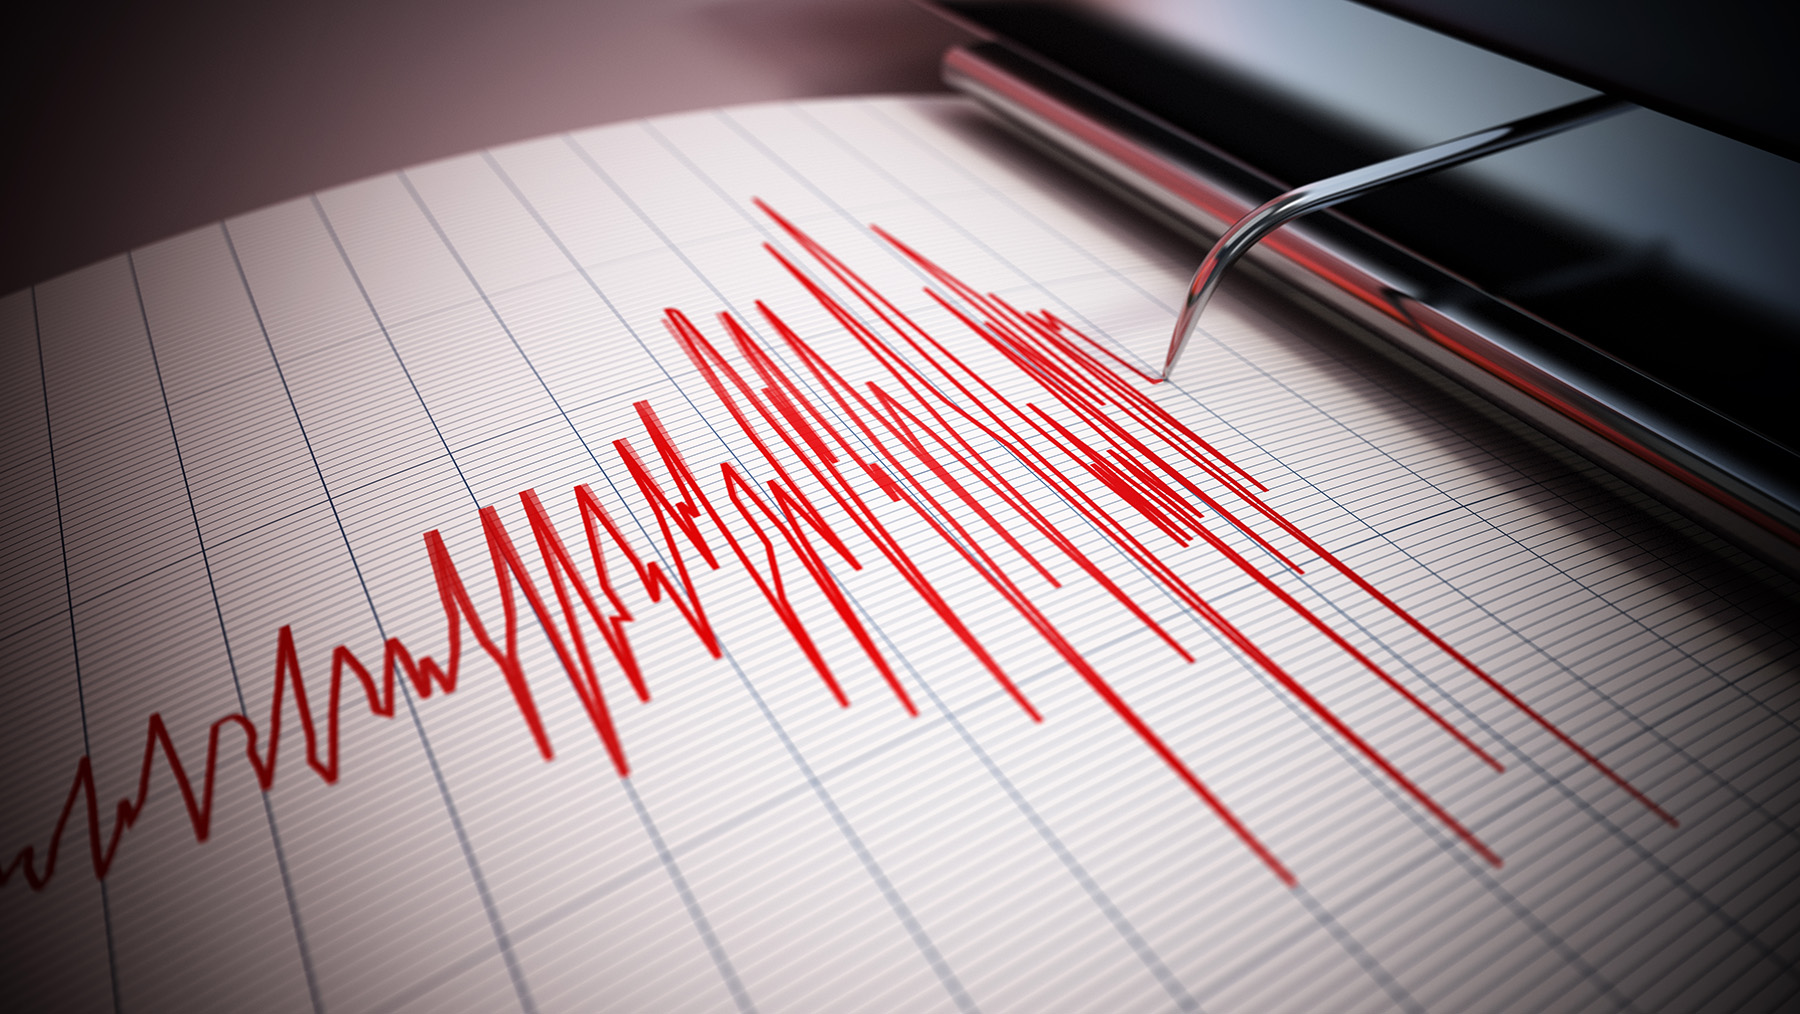 Photograph shows the lines on a seismograph.